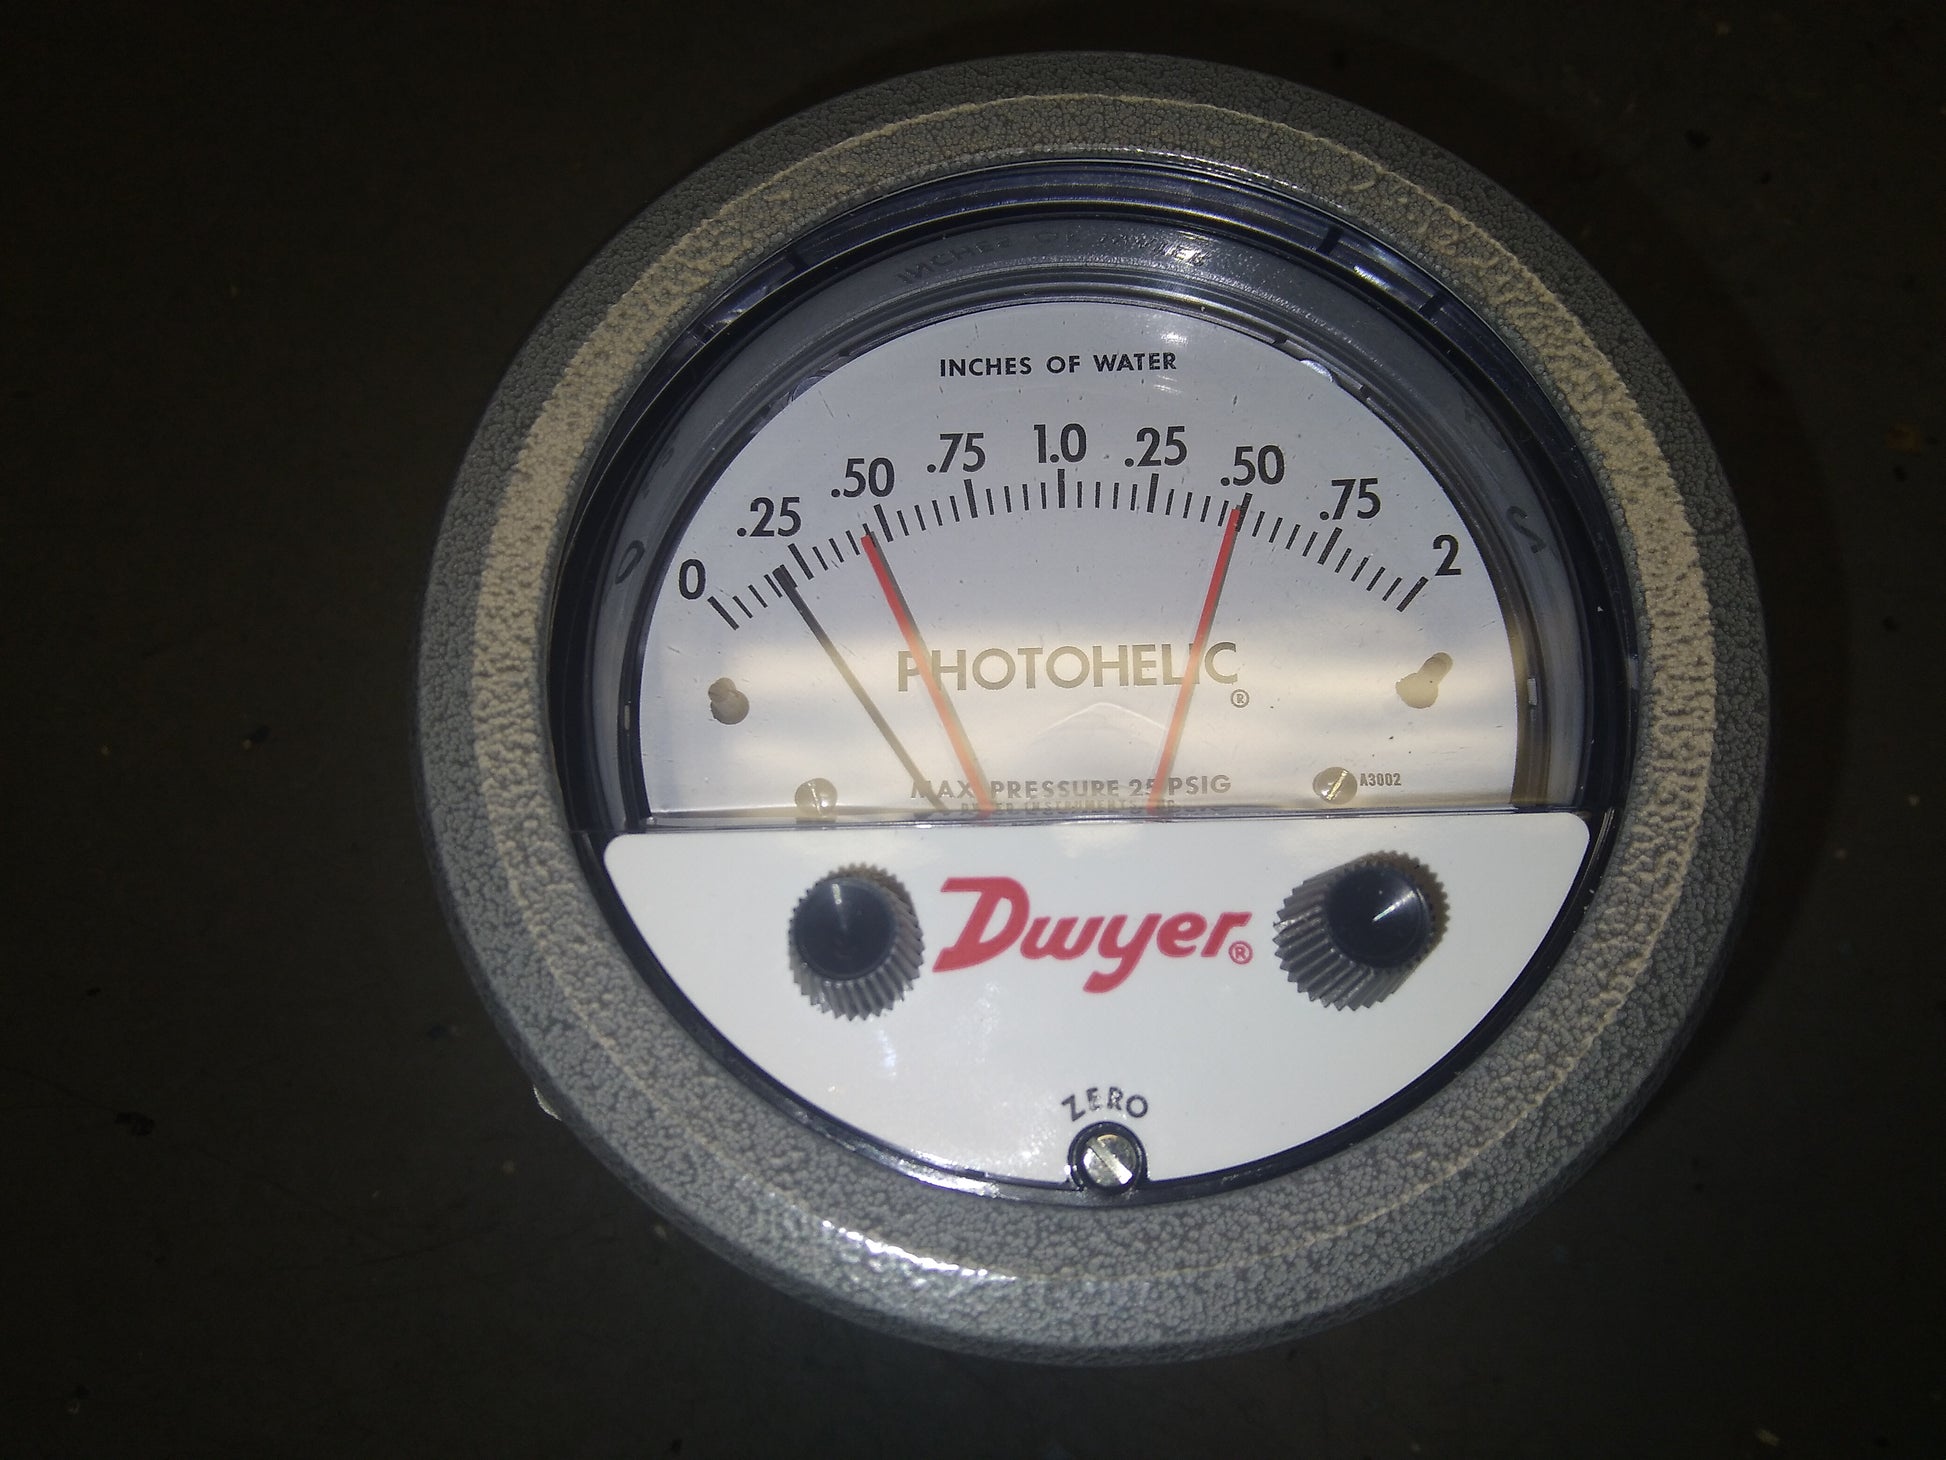 PHOTOHELIC DIFFERENTIAL PRESSURE GAUGE.TYPE 0 TO 2" WC